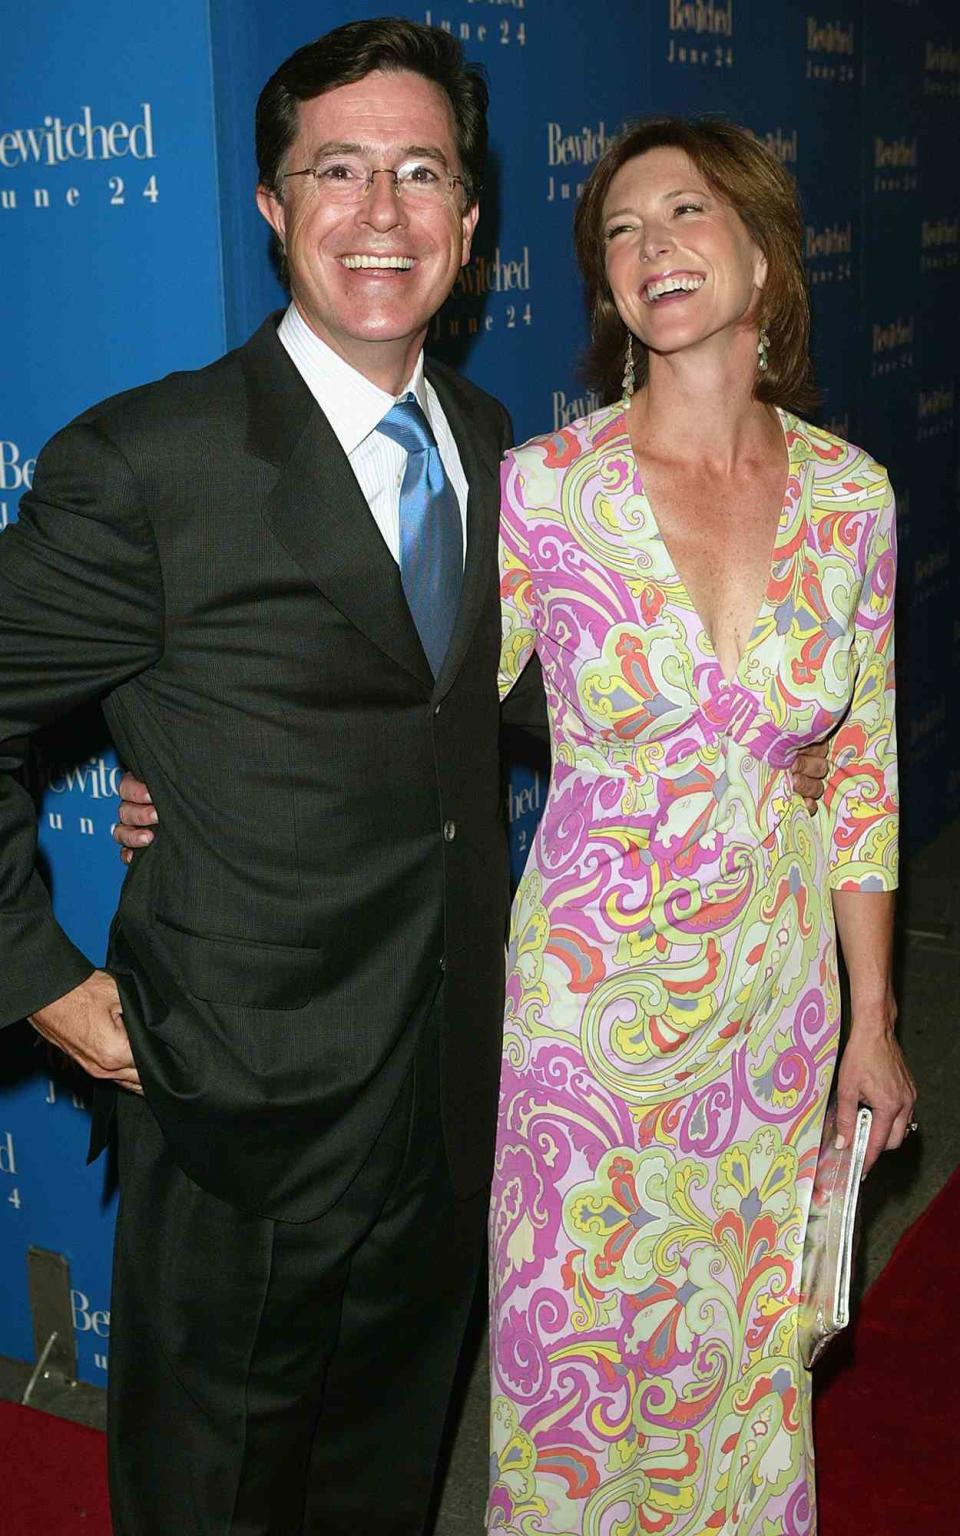 Stephen Colbert and his wife Evelyn attend the premiere of "Bewitched" at the Ziegfeld Theatre on June 13, 2005 in New York City